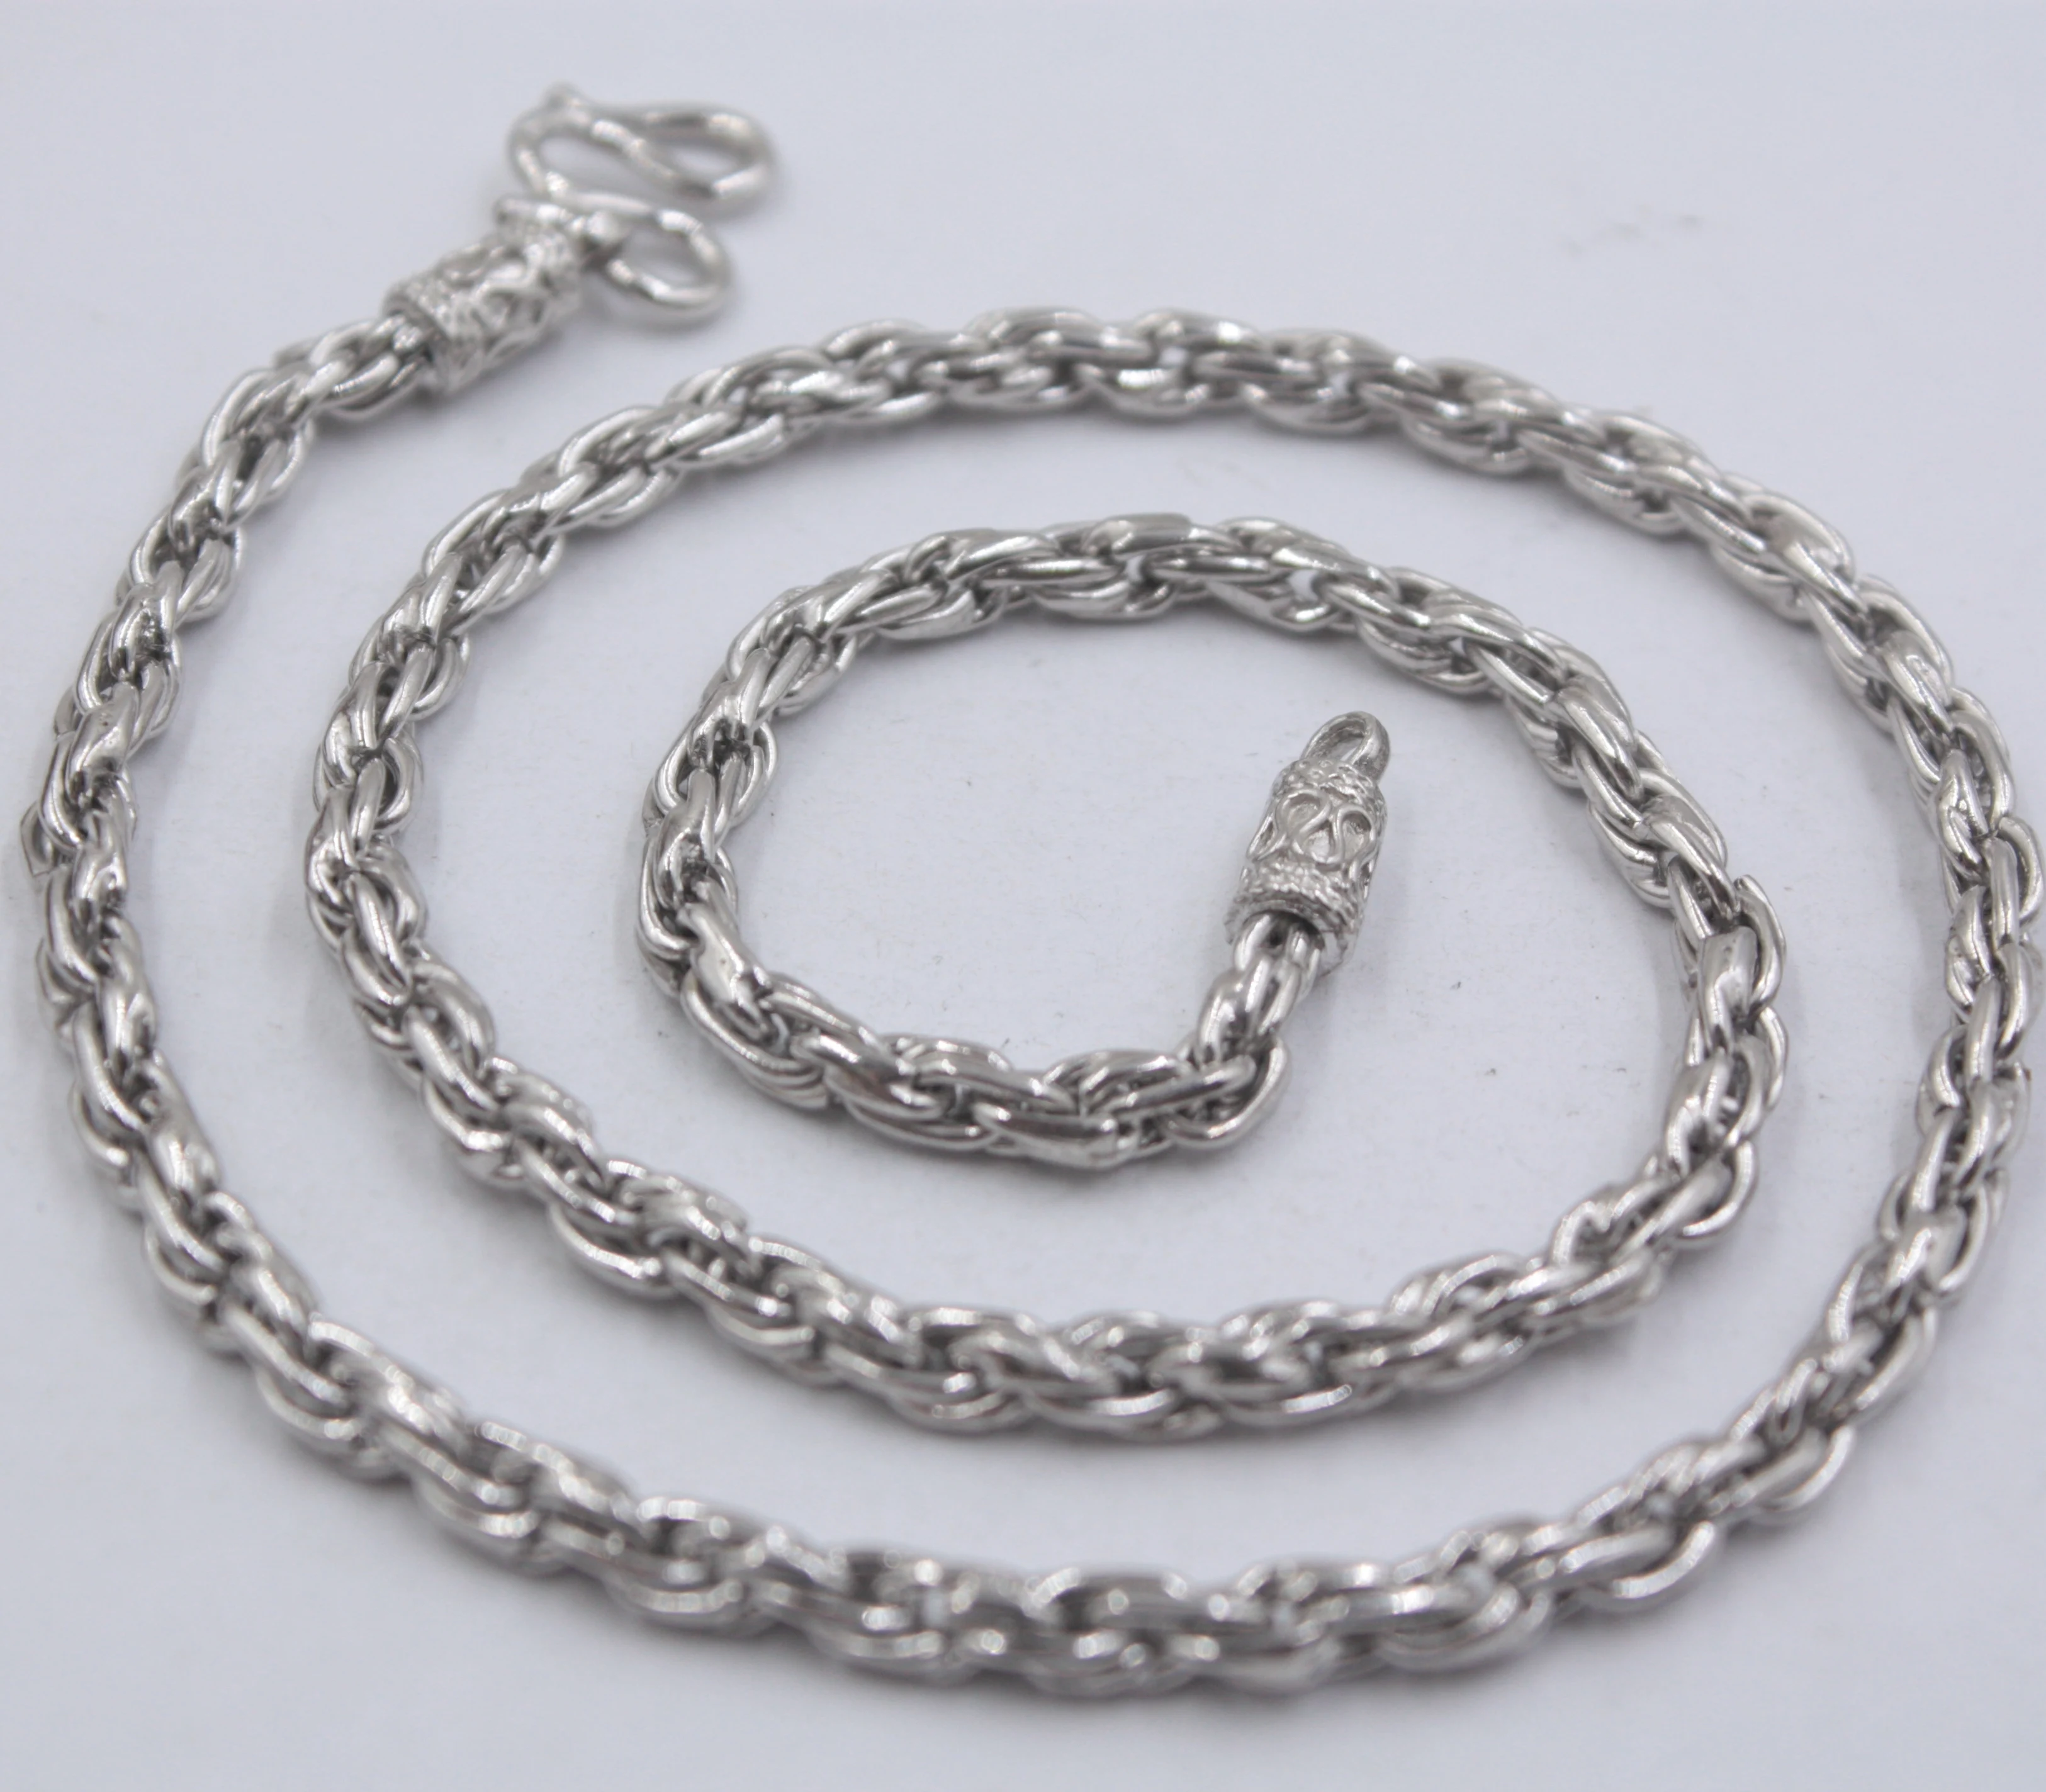 40+4CM Aokarry S925 Silver Necklace for Girls Women Hollow White Chain Length 